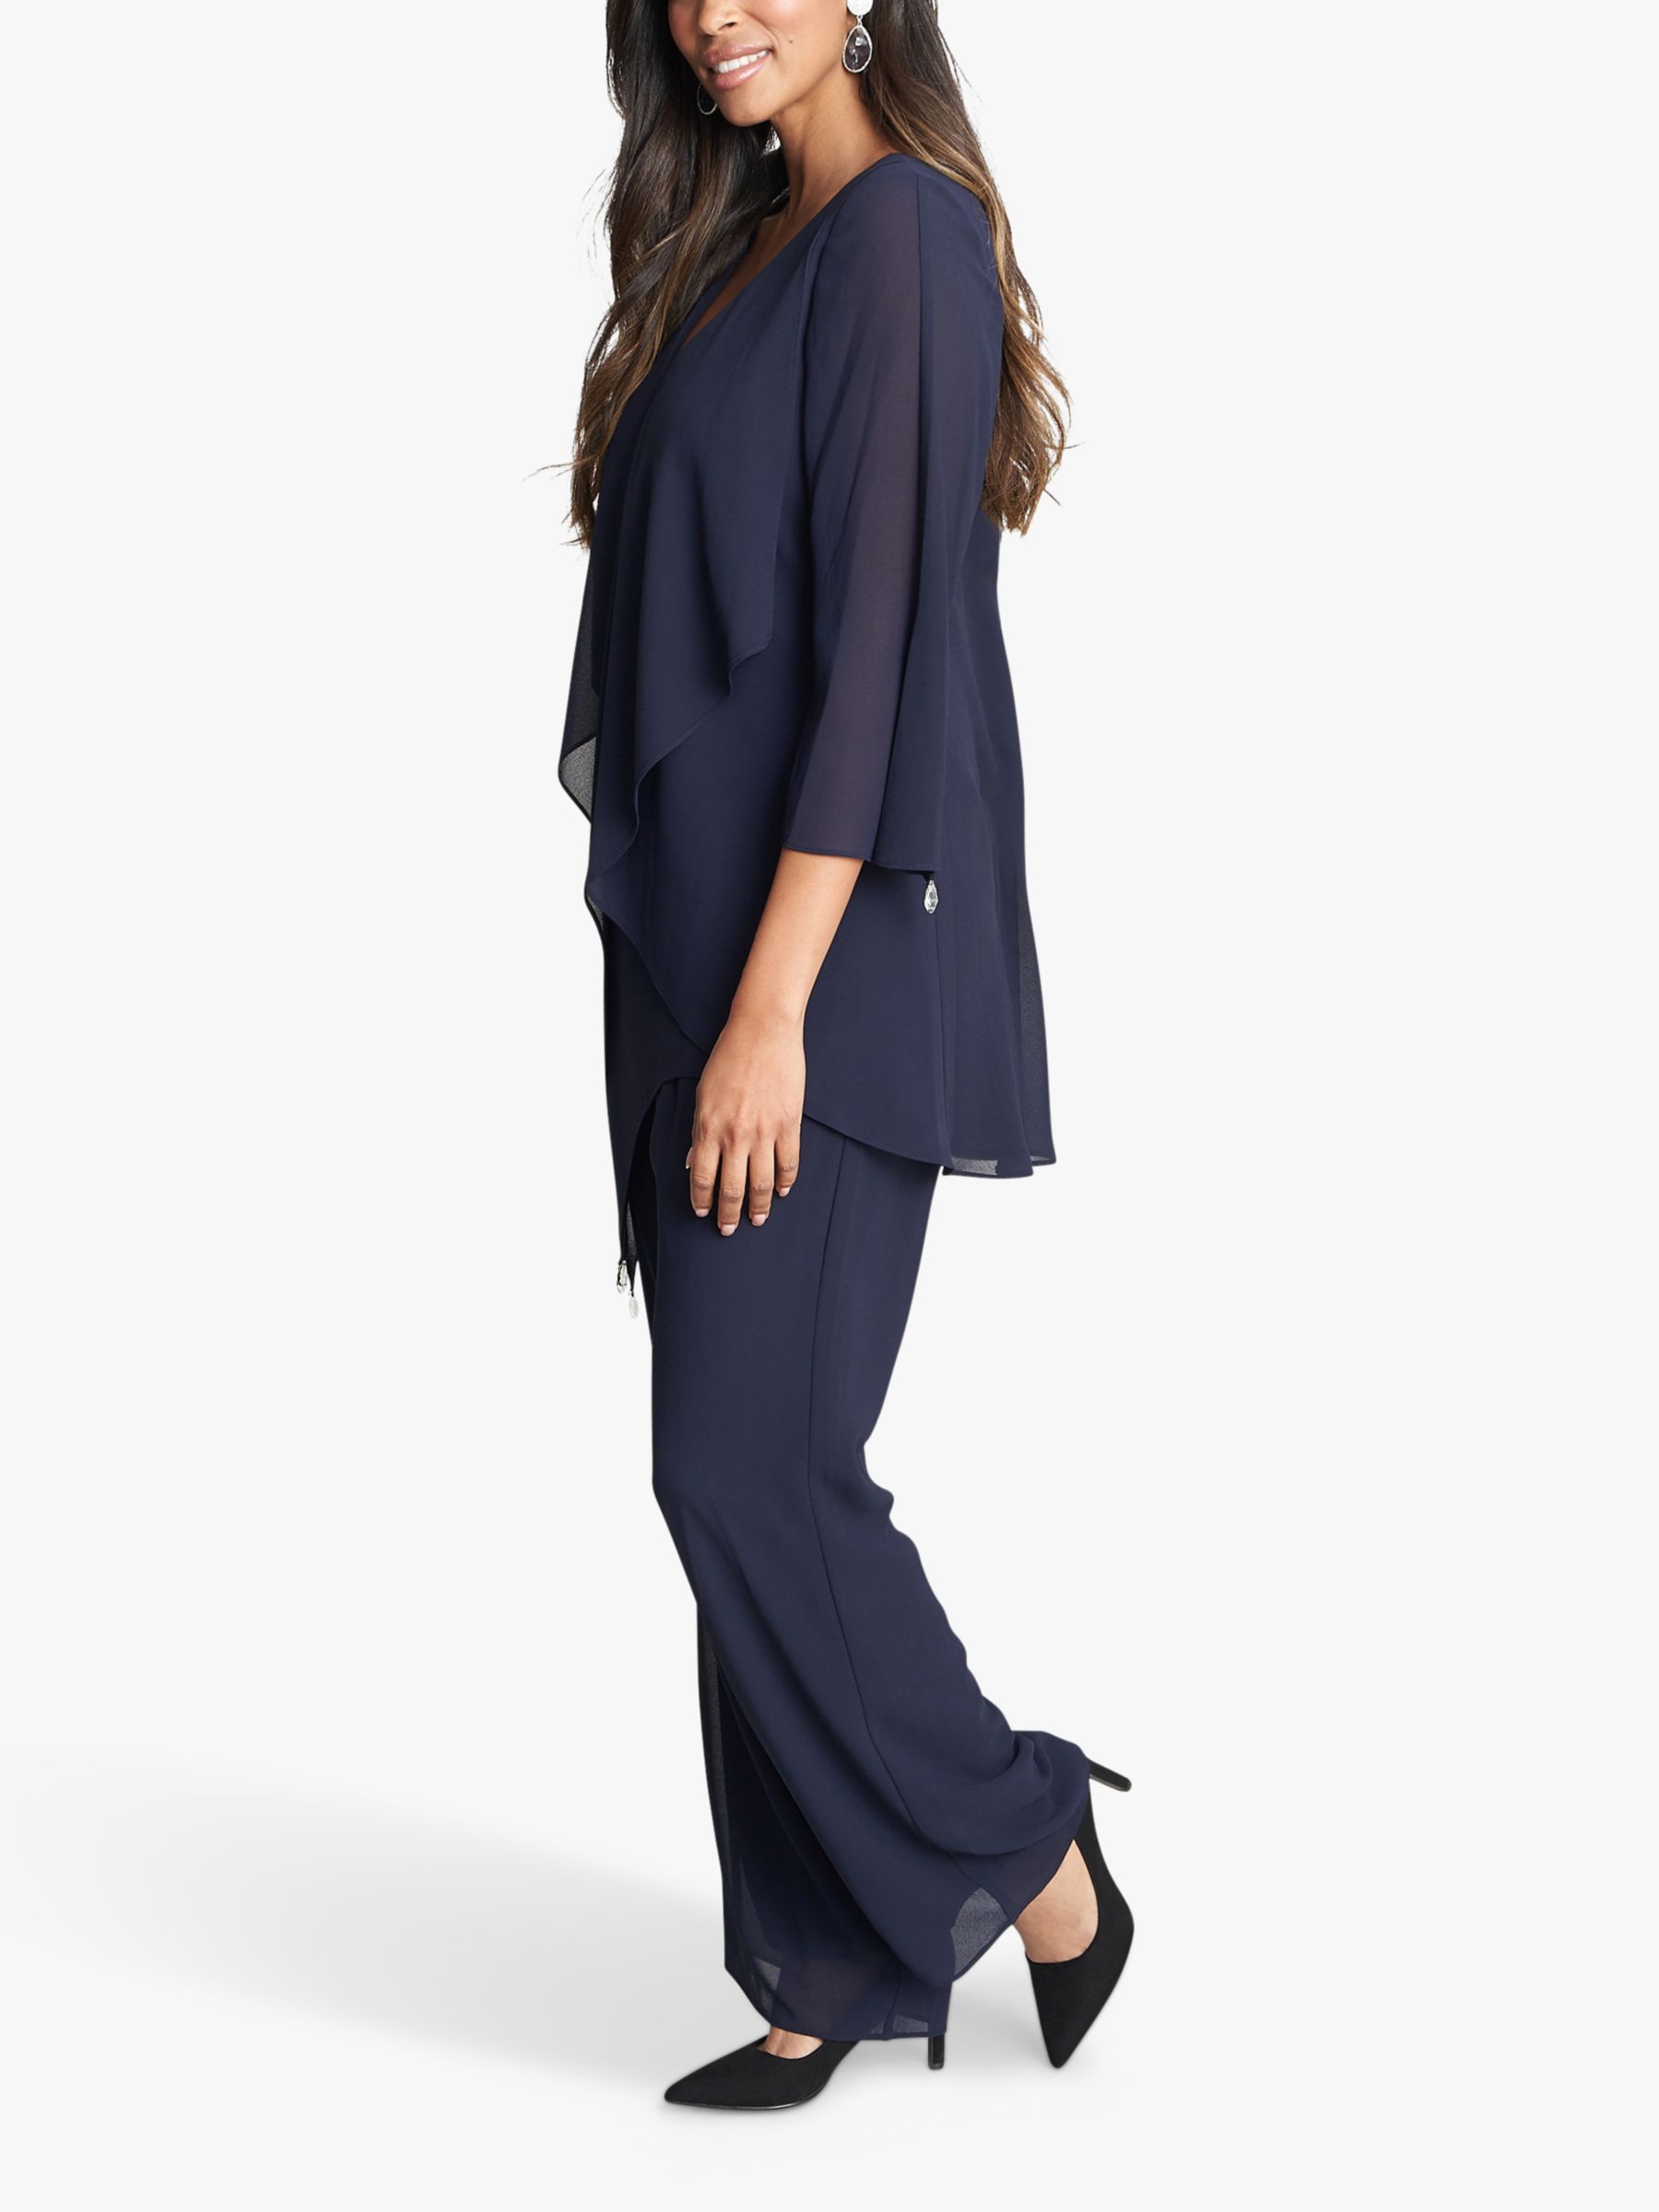 Gina Bacconi Wilma 2-Piece Suit With Asymmetric Cascade Ruffle Blouse & Wide Leg Trousers, Navy, 10